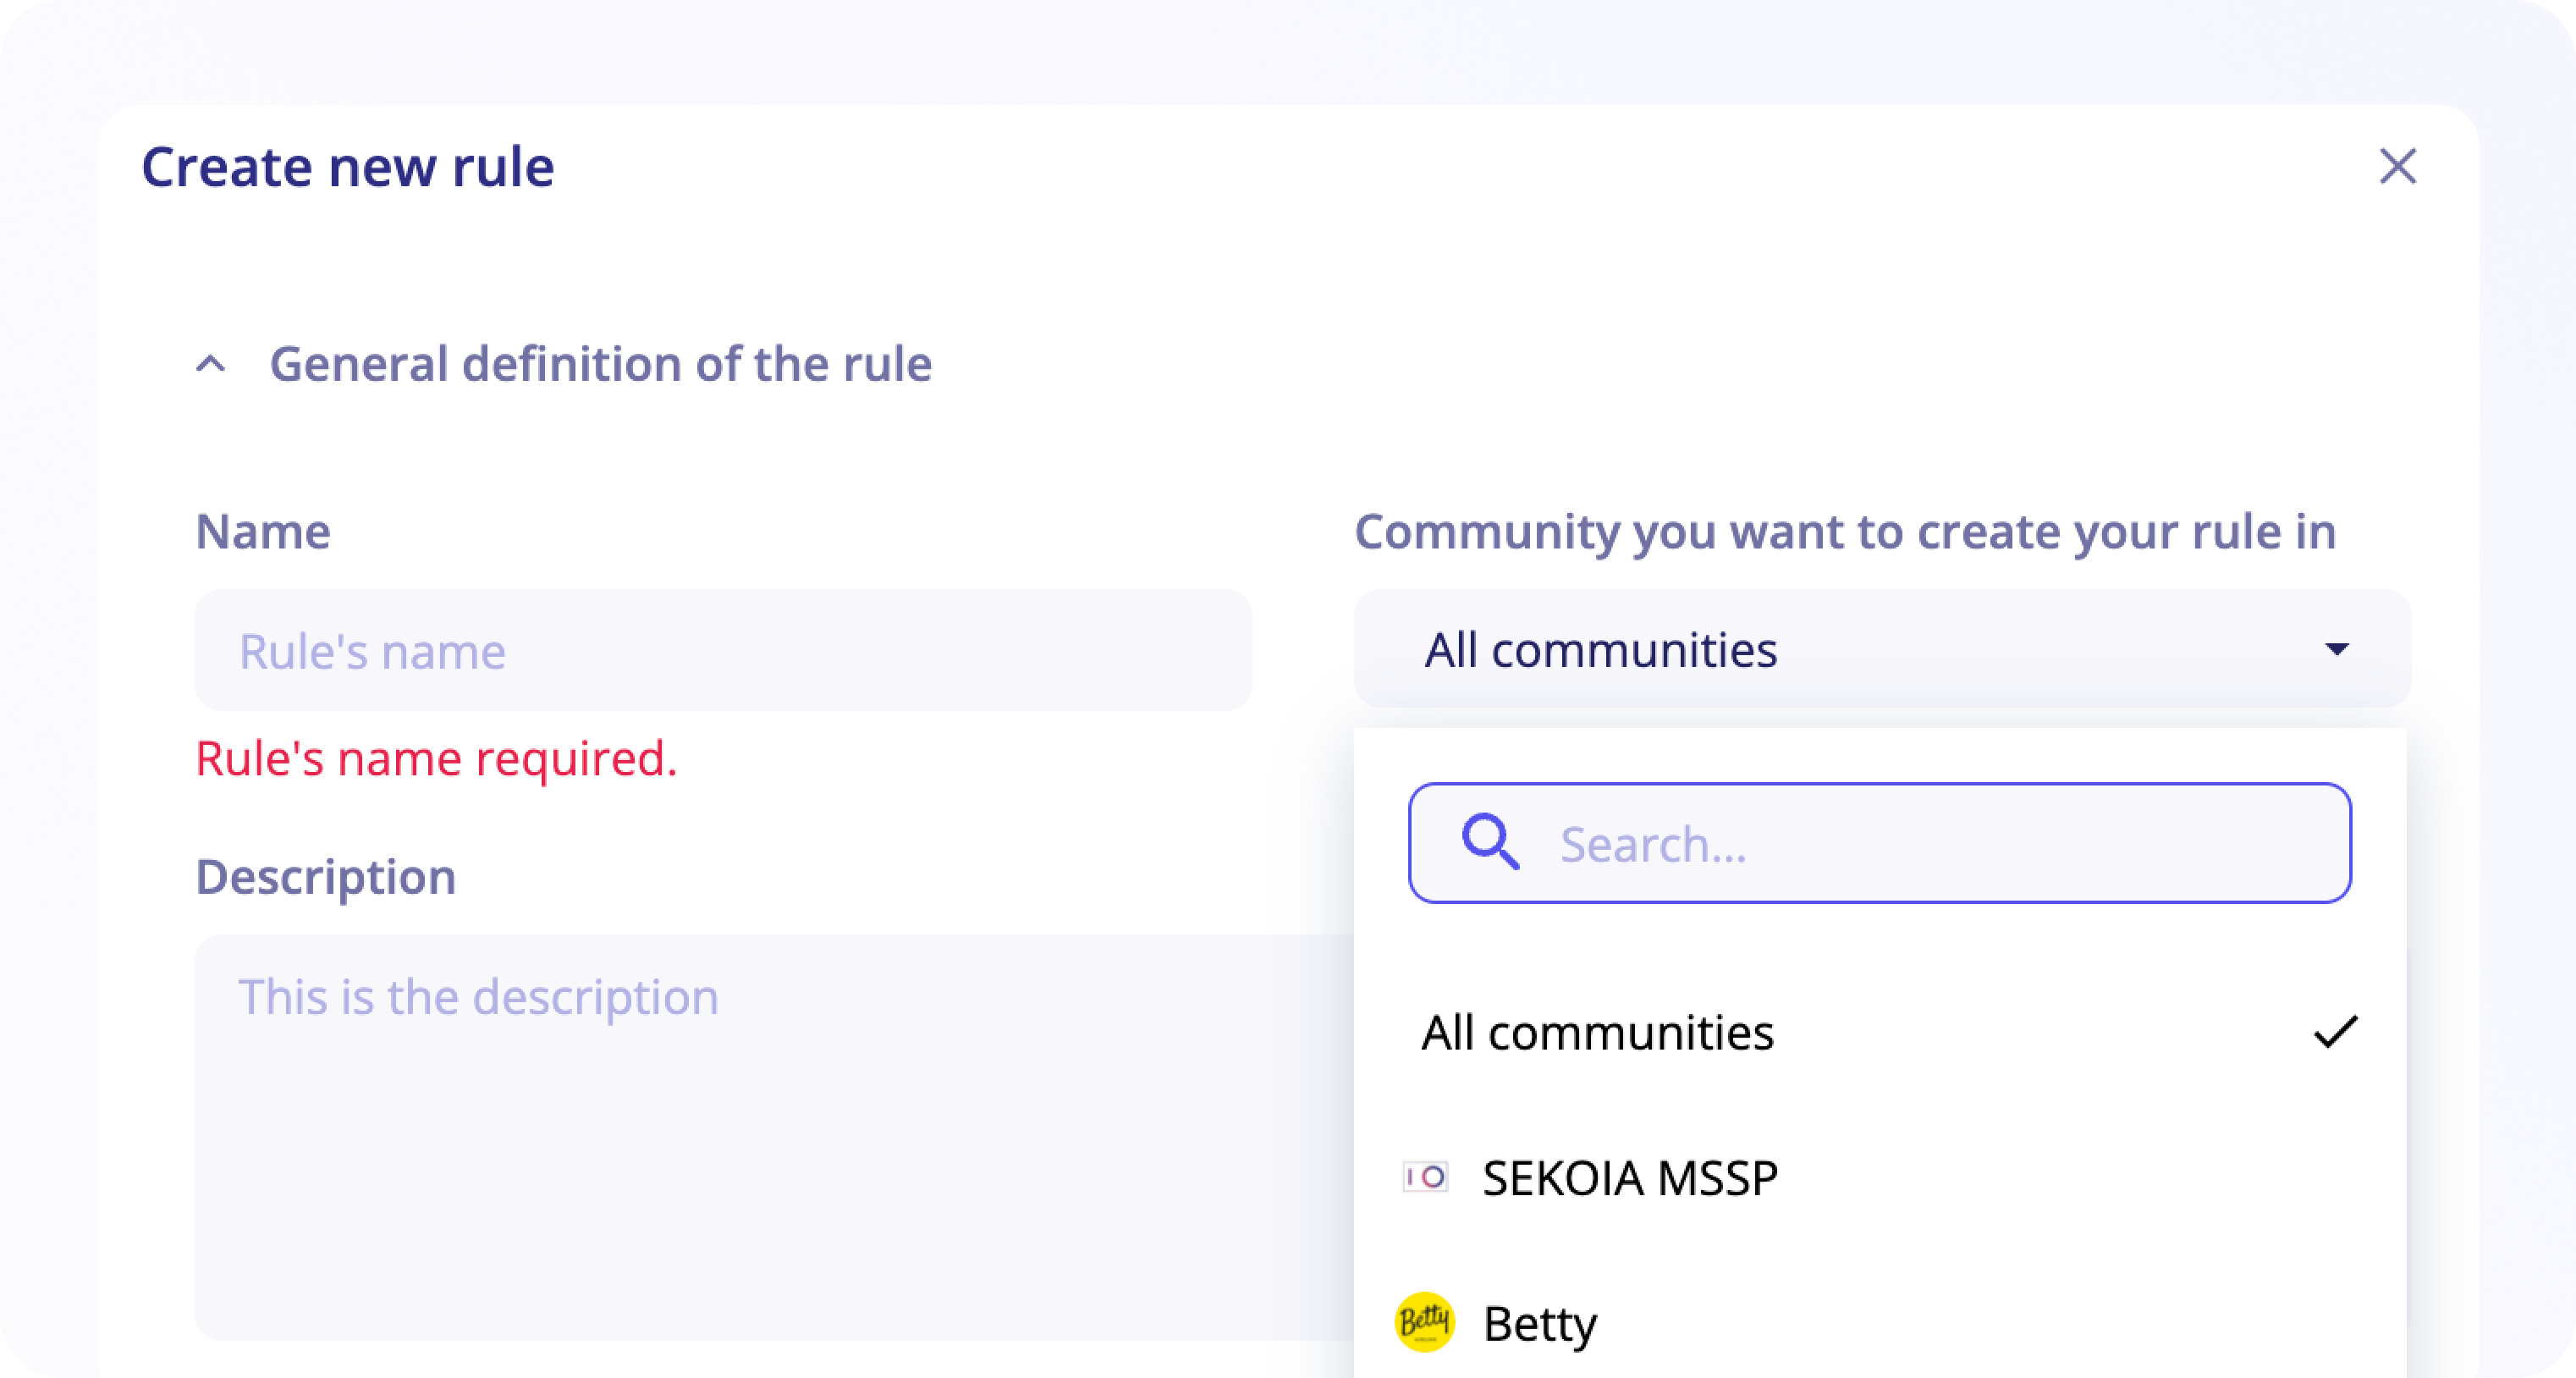 Create rules for MSSP community